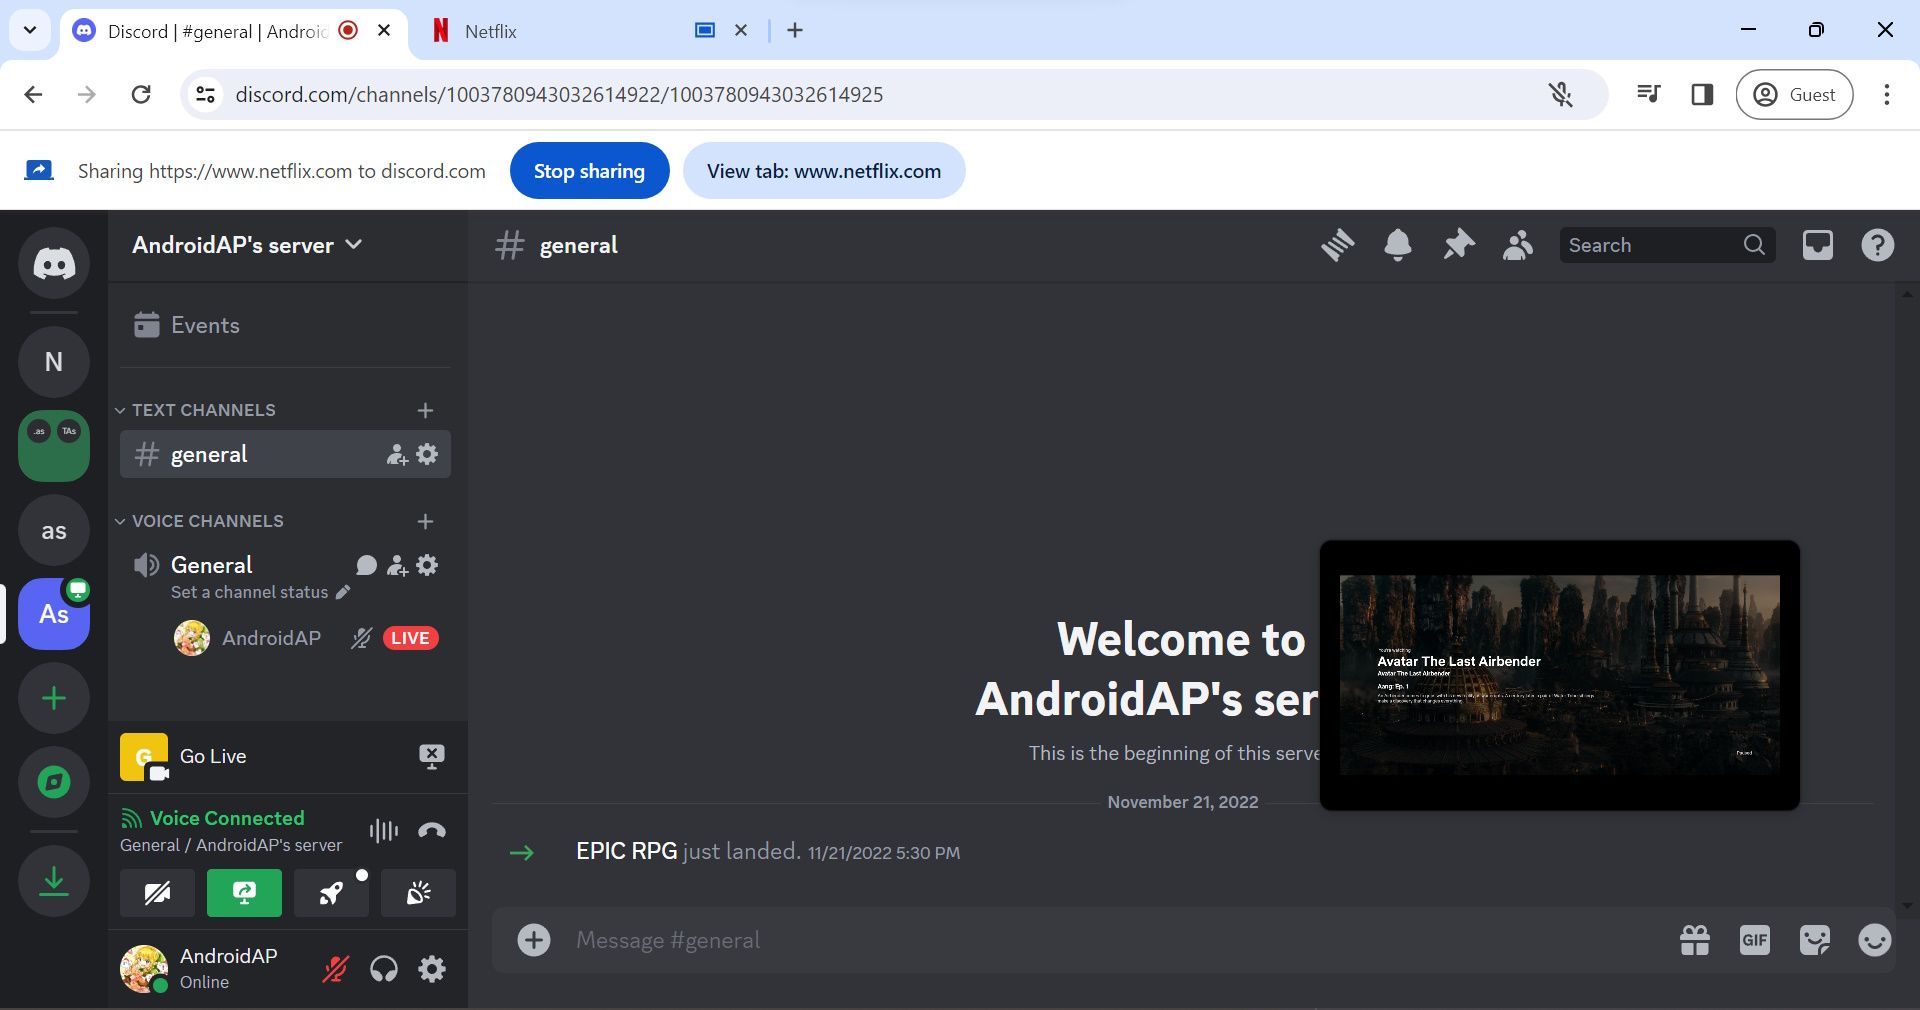 netflix share screen on discord with thumbnail view open of the viewed screen